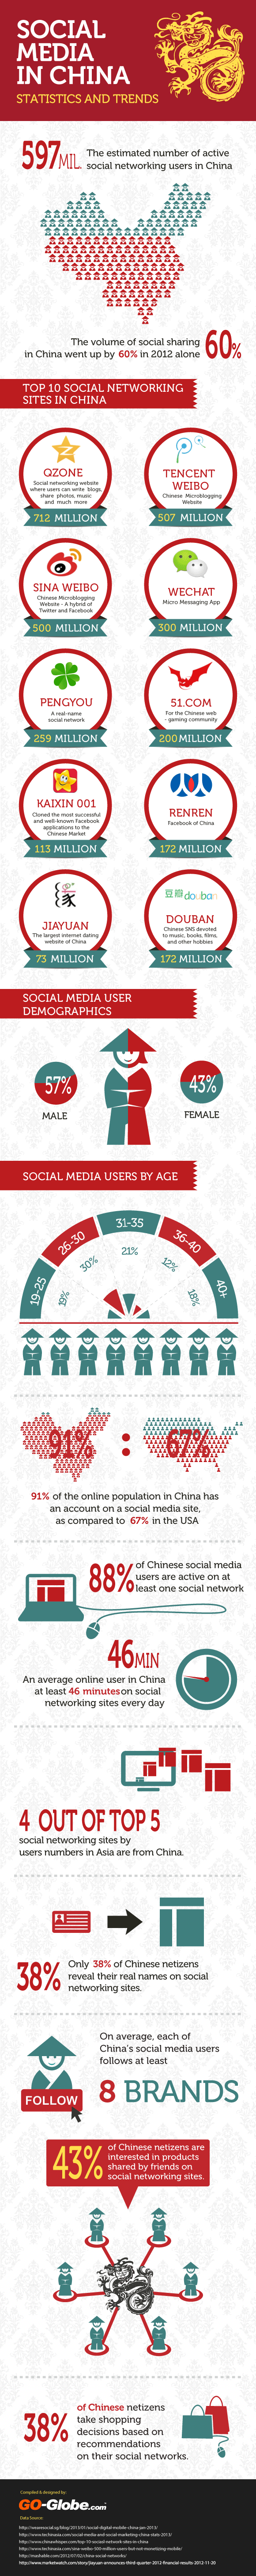 Social Media In China Statisticus And trends